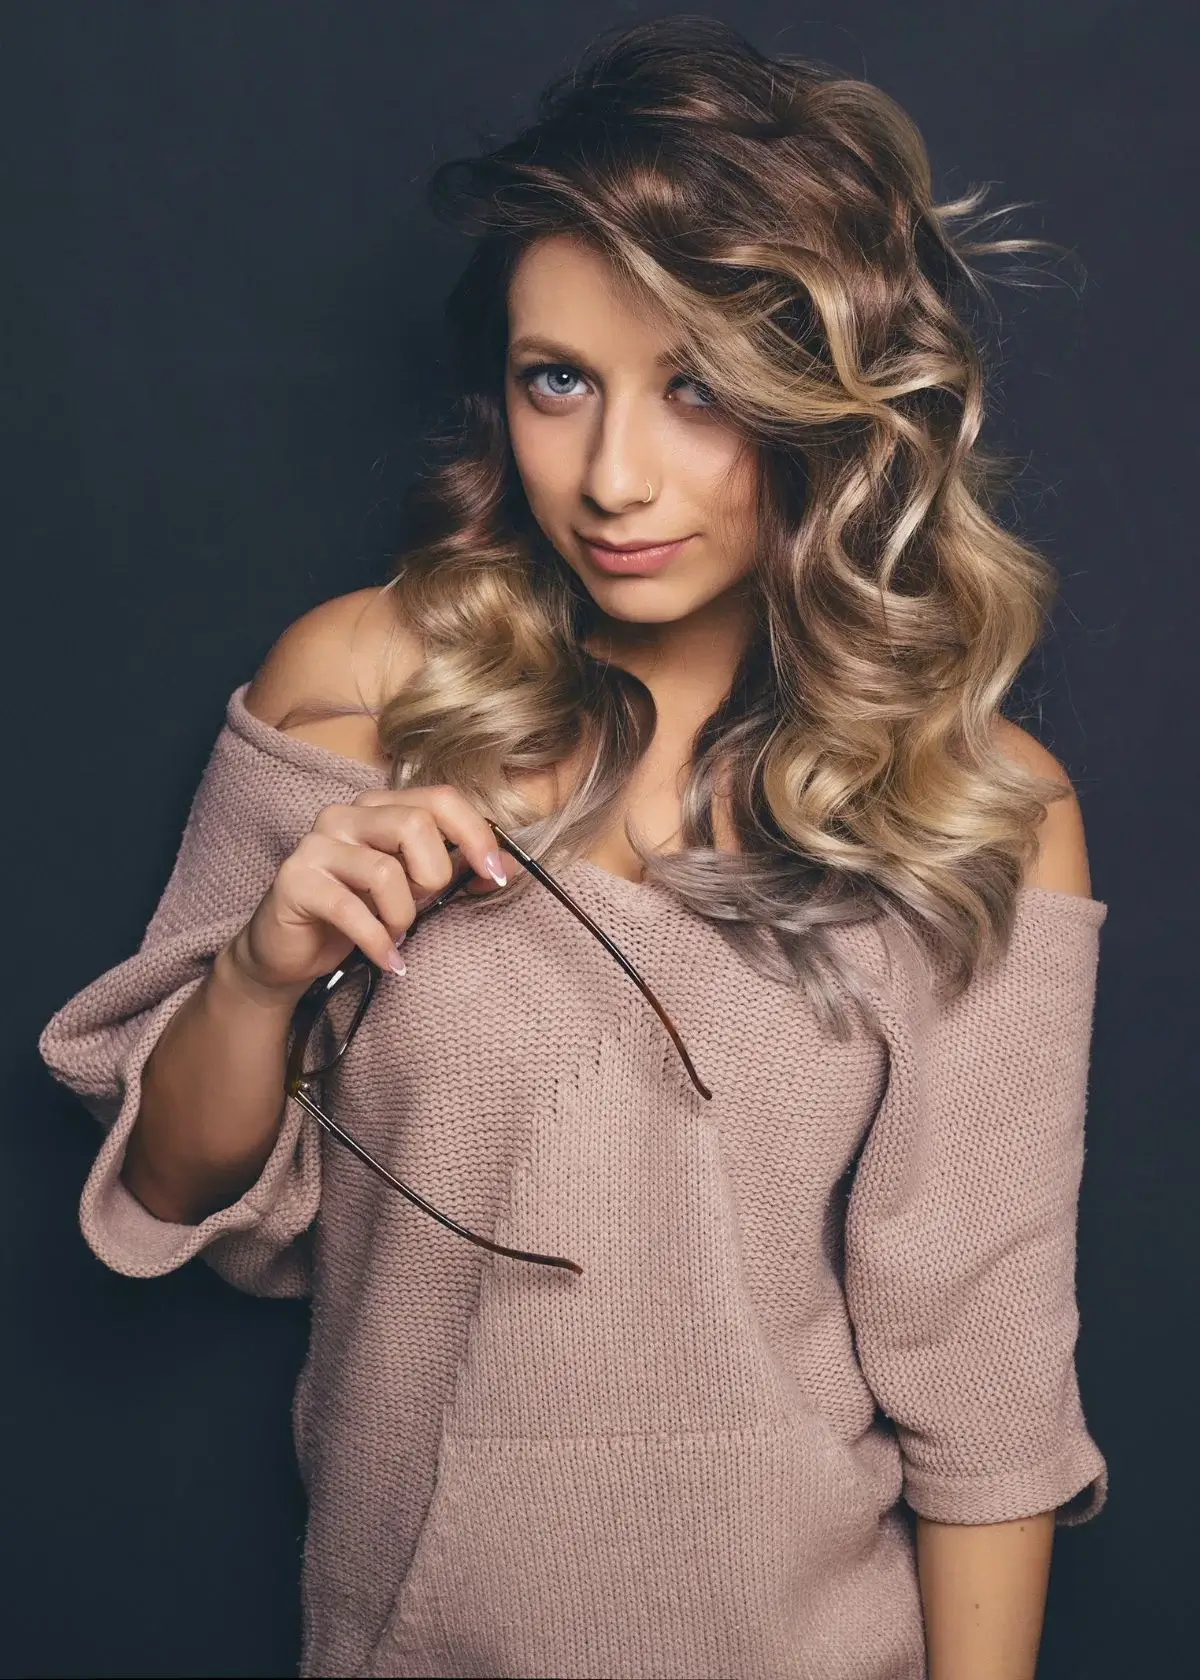 Is a wavy hair styler suitable for all hair types?